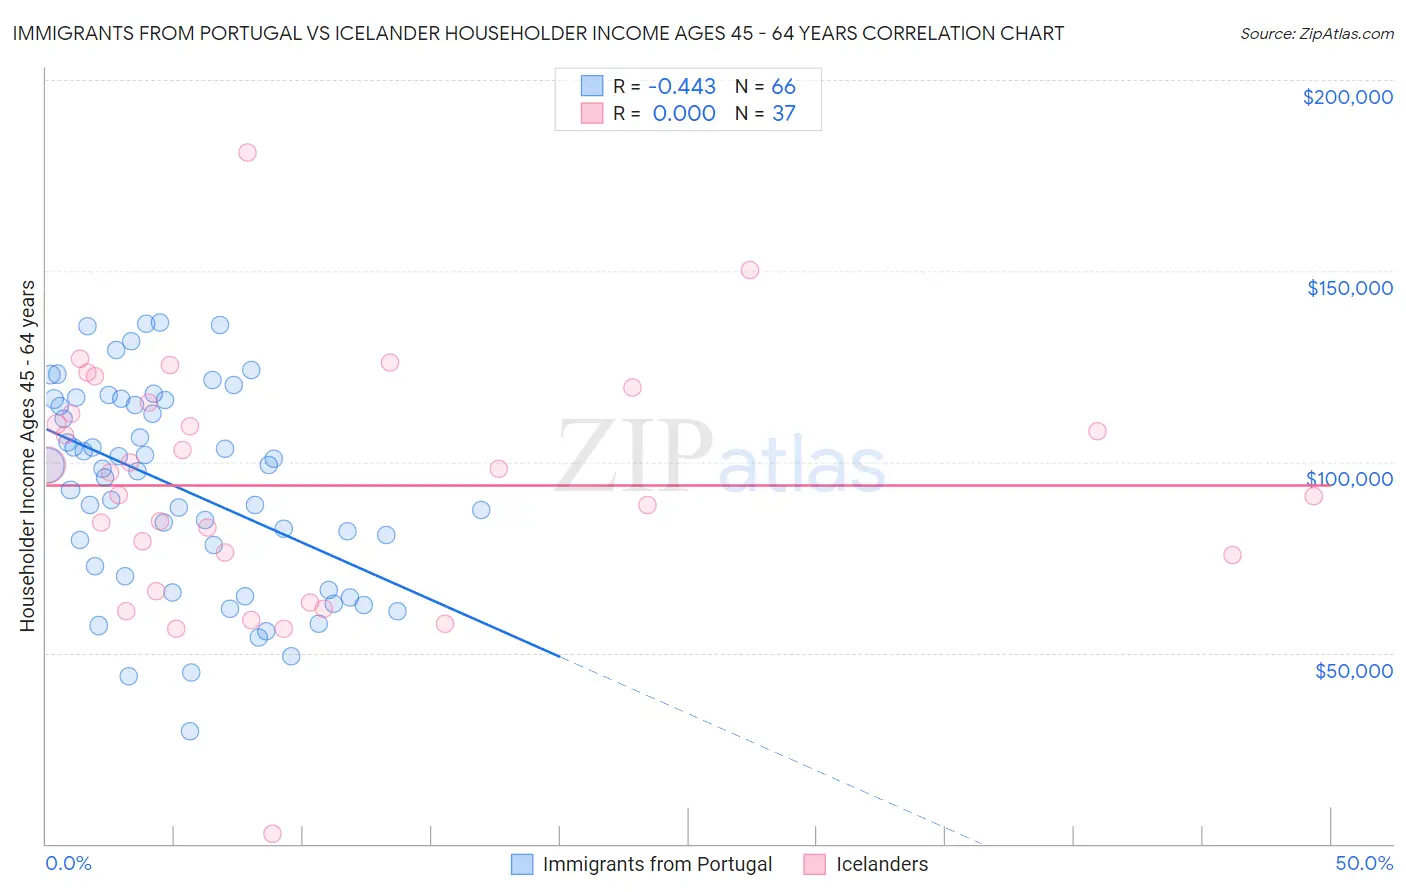 Immigrants from Portugal vs Icelander Householder Income Ages 45 - 64 years